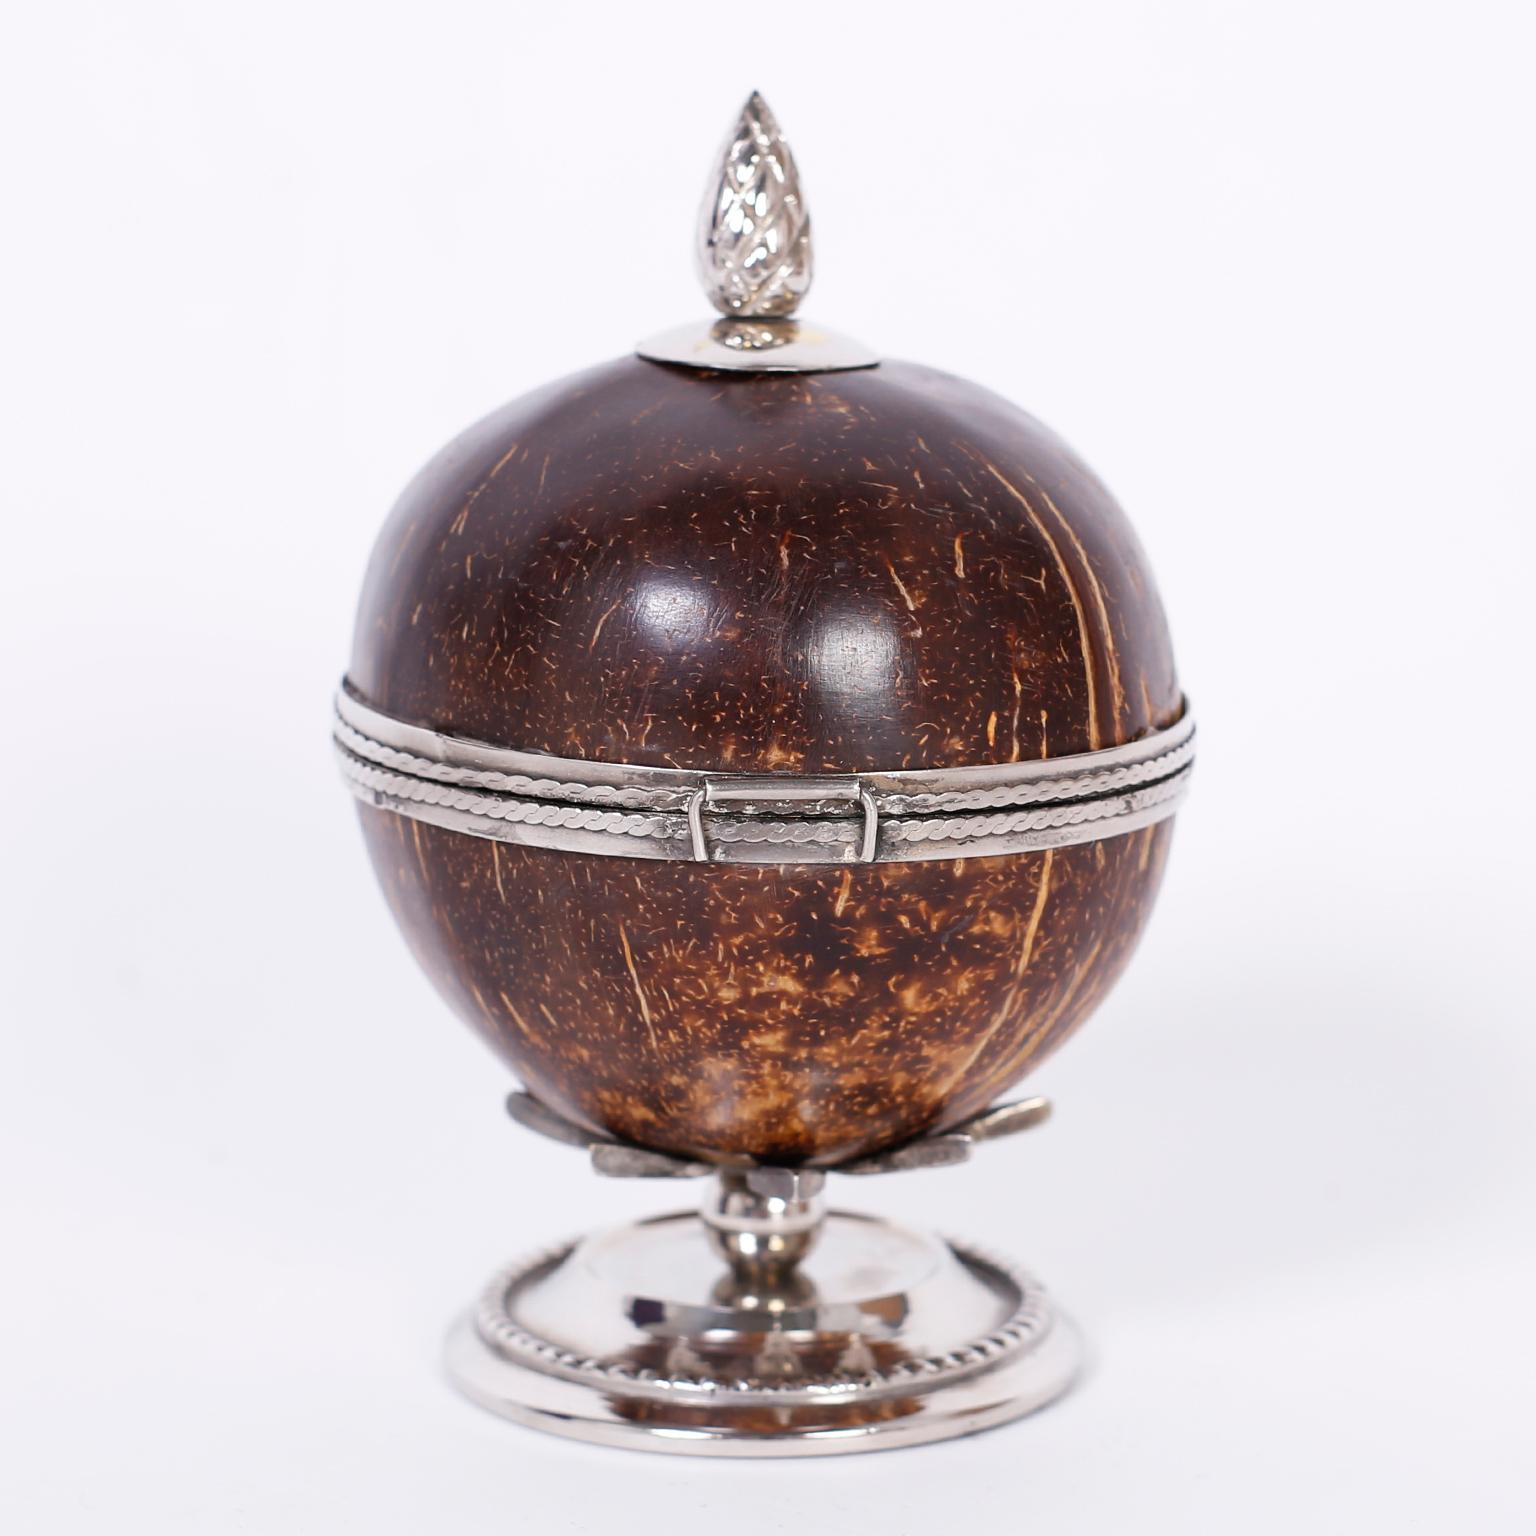 Antique Anglo-Indian trinket box crafted with a polished coconut decorated with silvered metal finial, collars, clasp and stand with jewelry like precision.